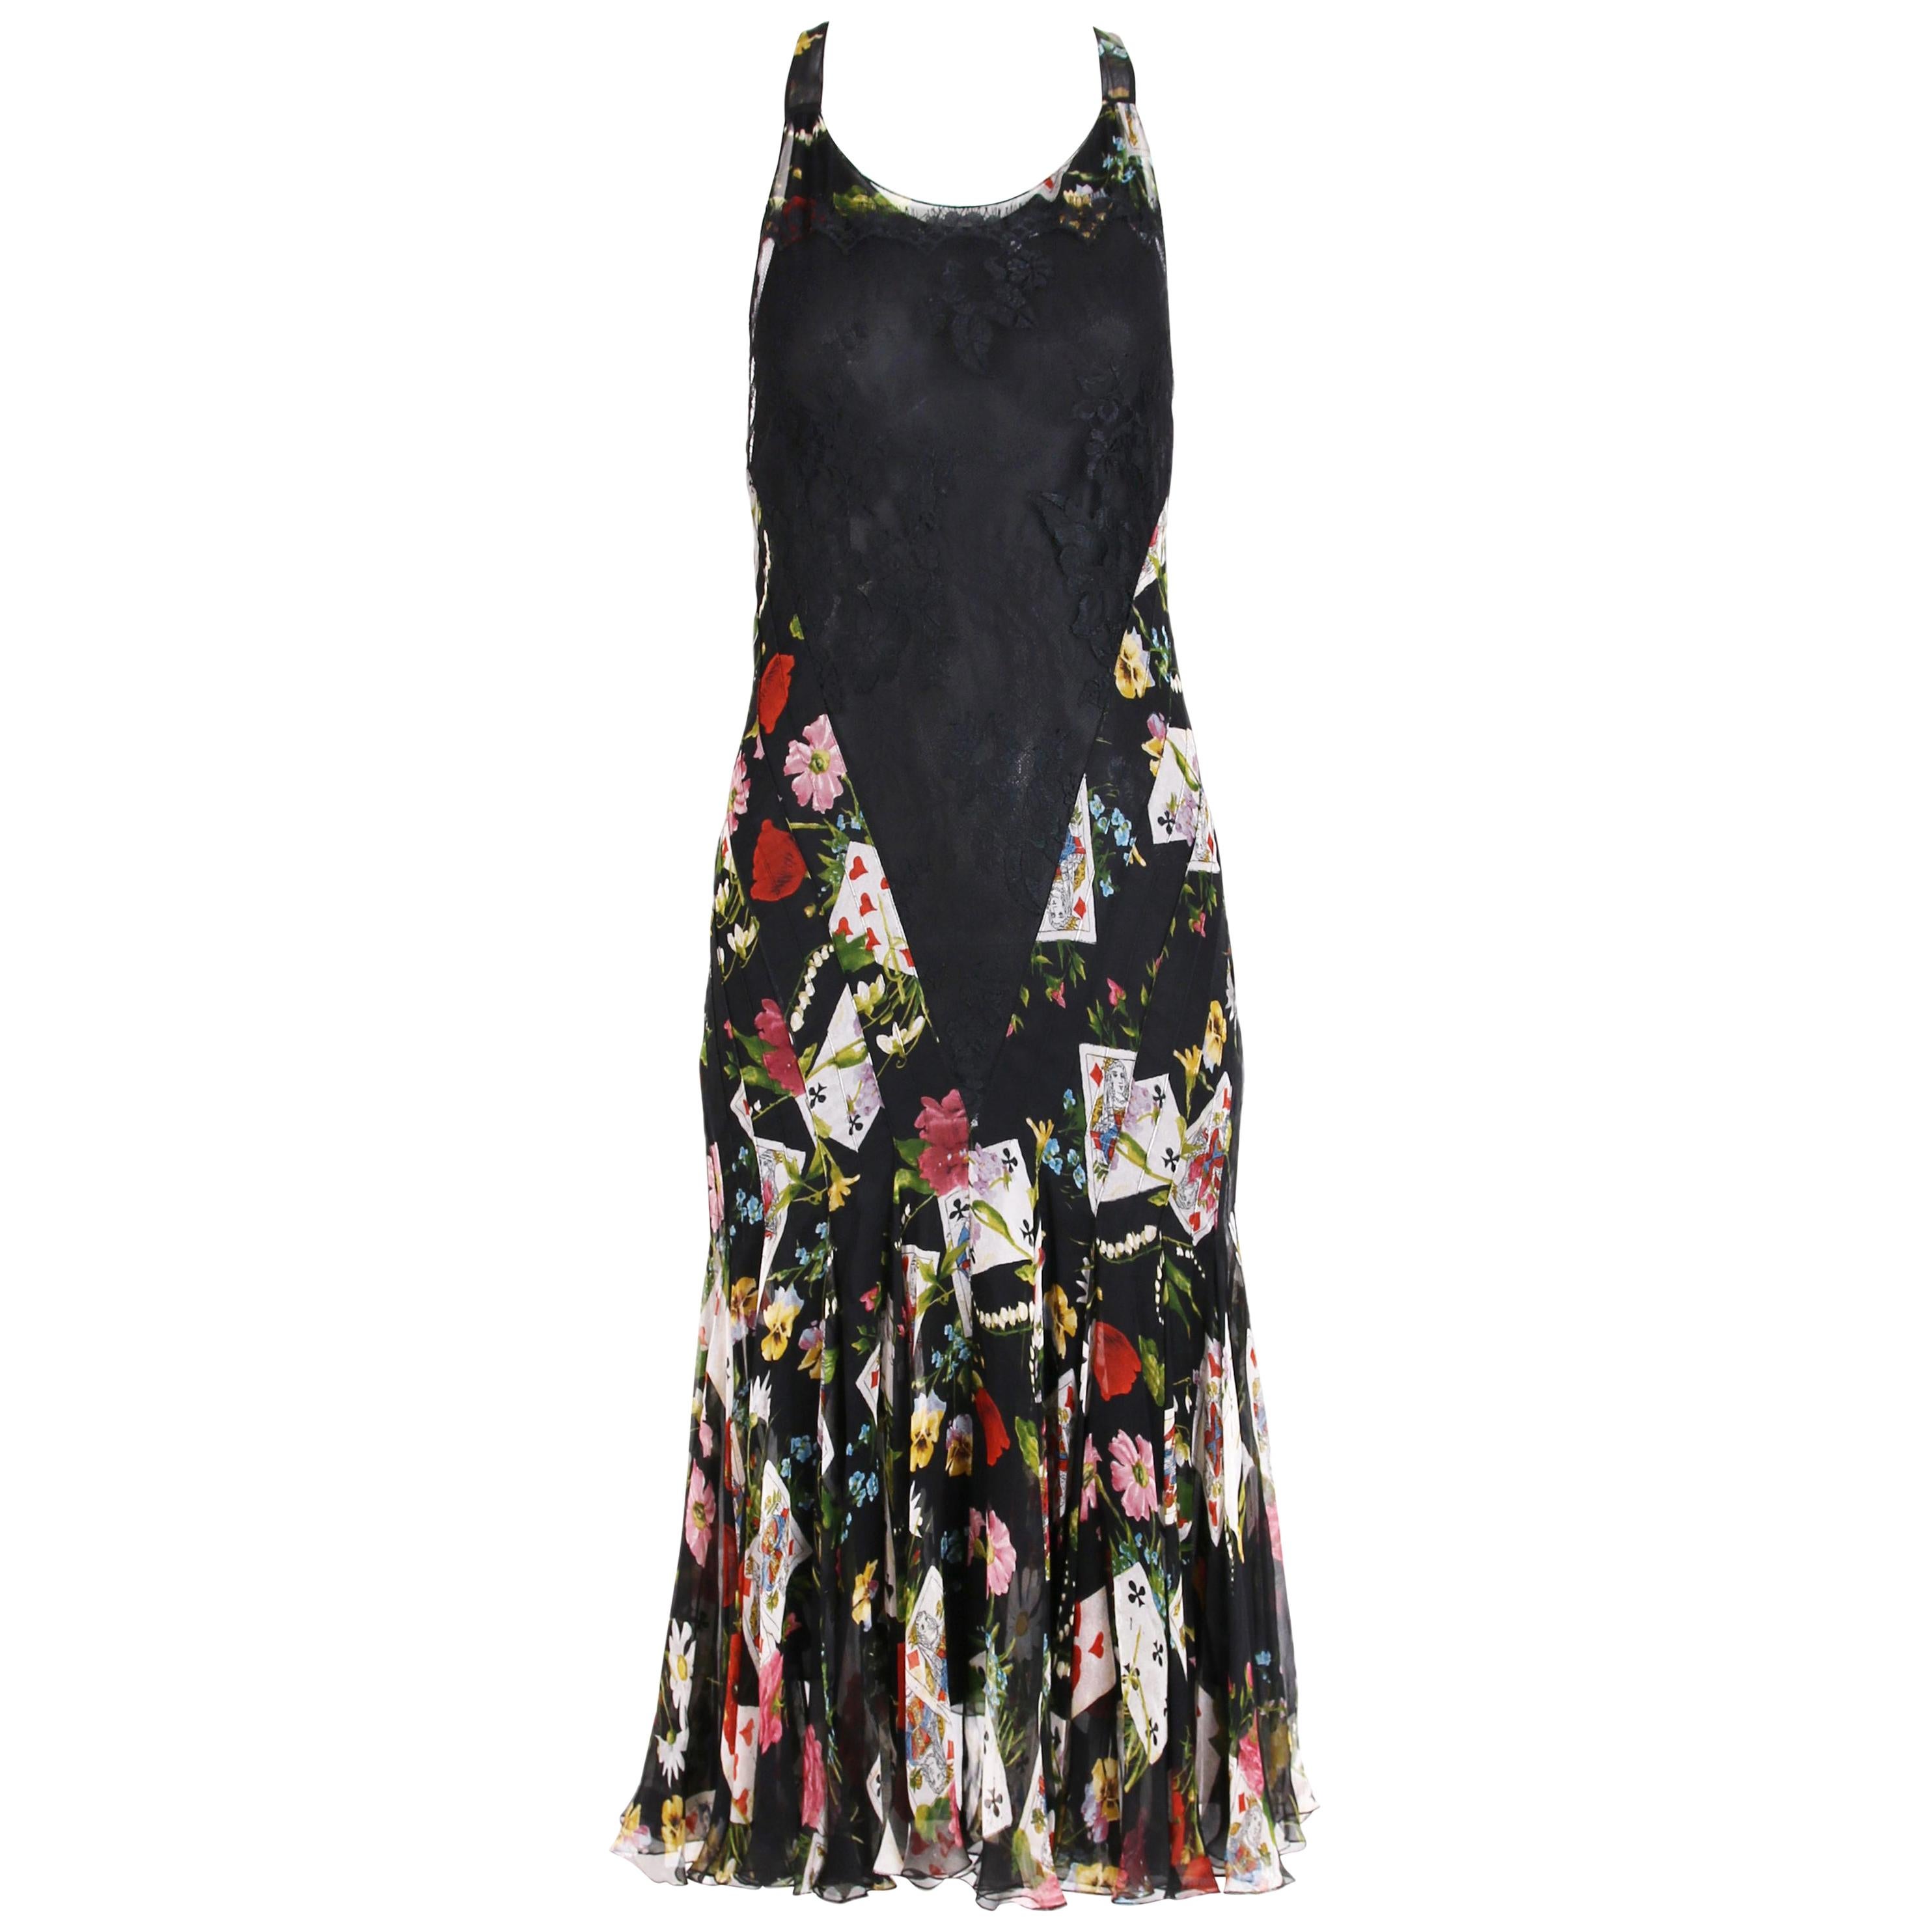  Christian Dior by Galliano Chiffon & Lace Playing Card Print Cocktail Dress For Sale